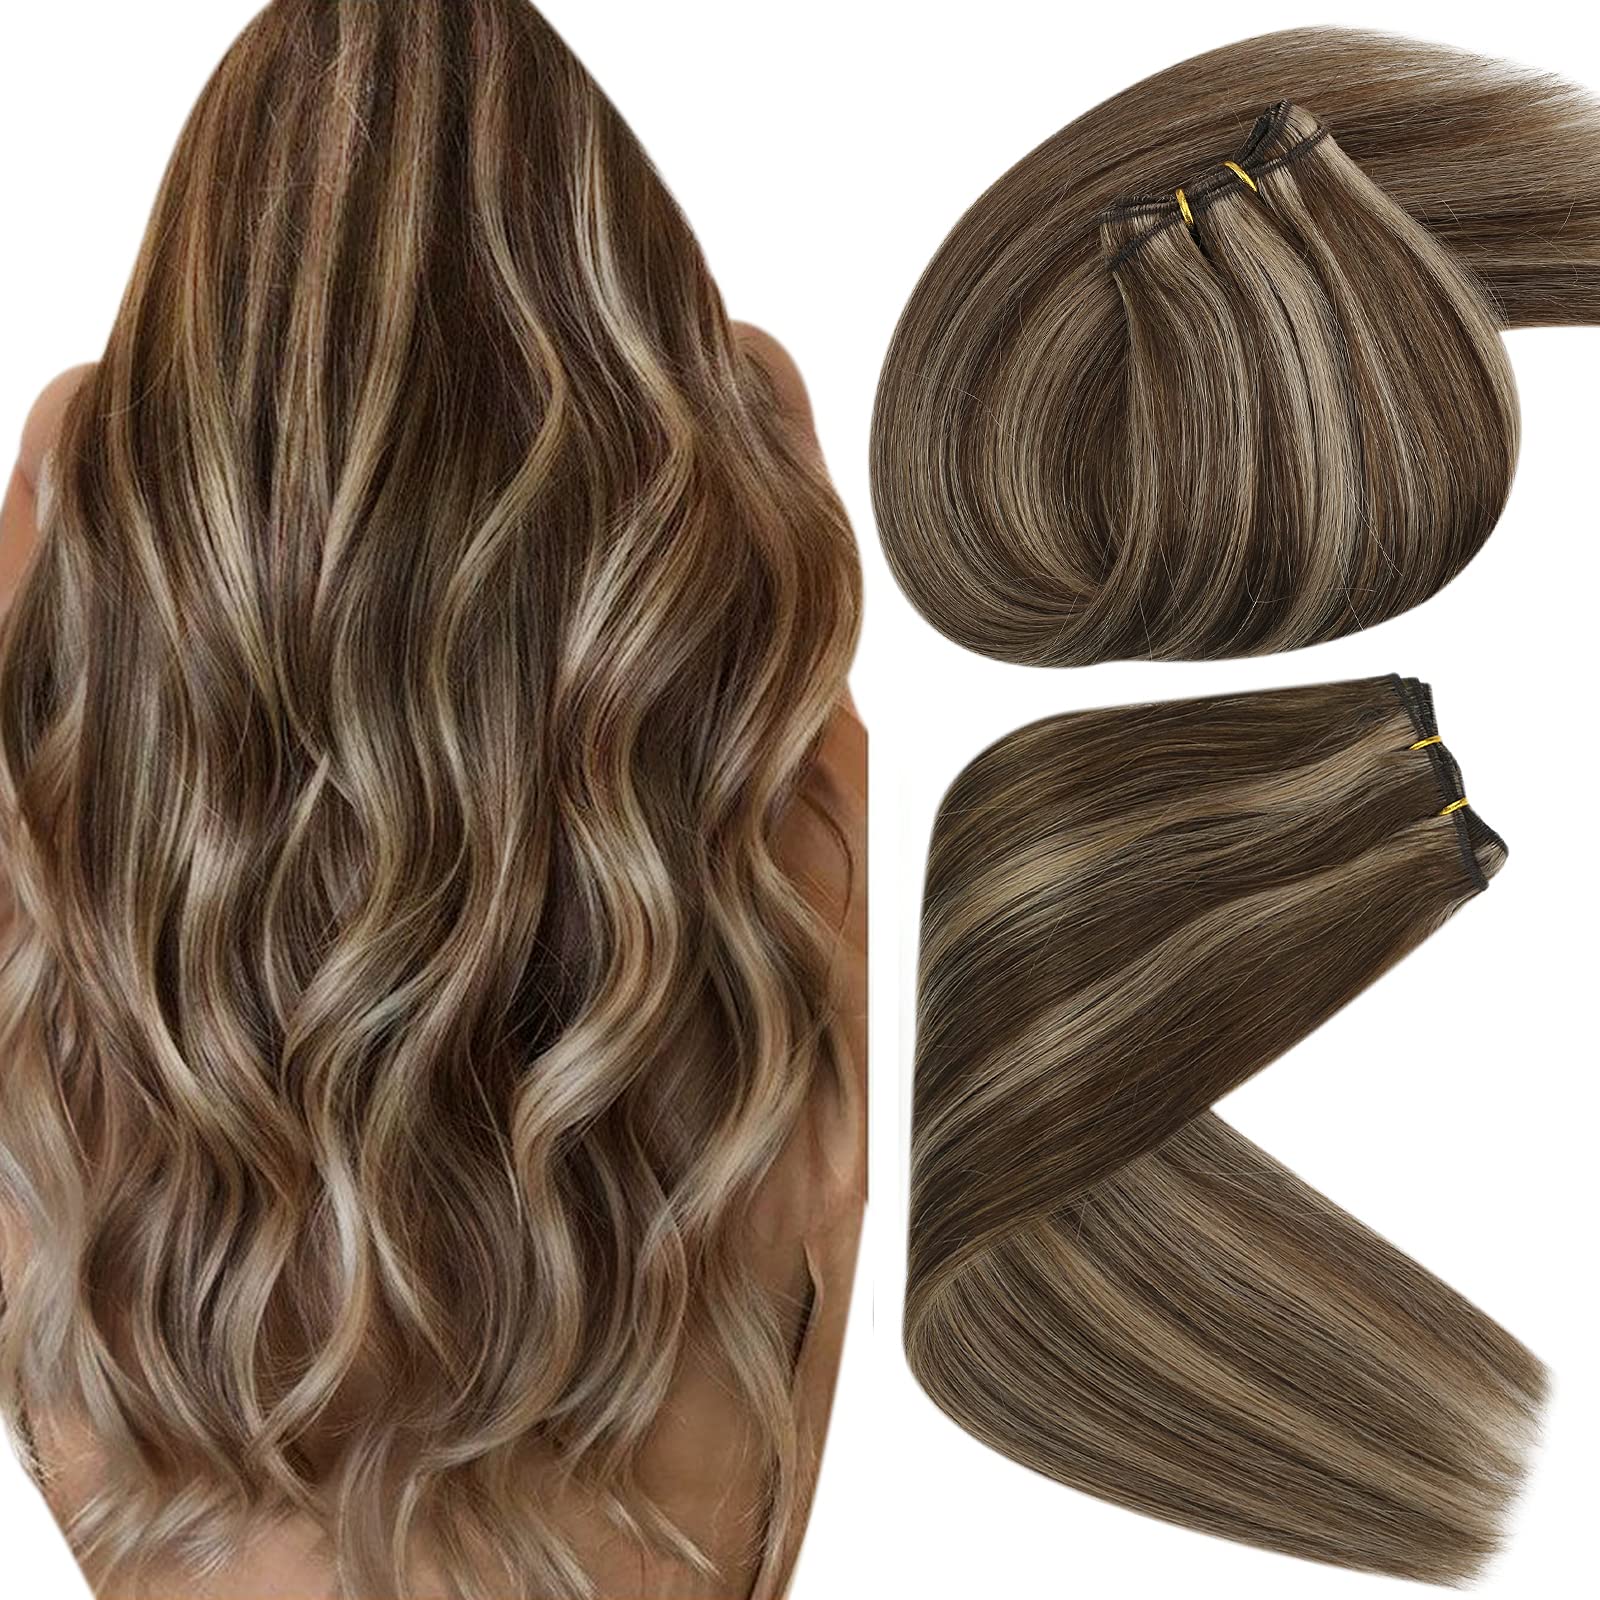 Sunny Sew in Hair Extensions Real Human Hair Brown Weft Hair Extensions  Highlights 22inch Bundle Weft